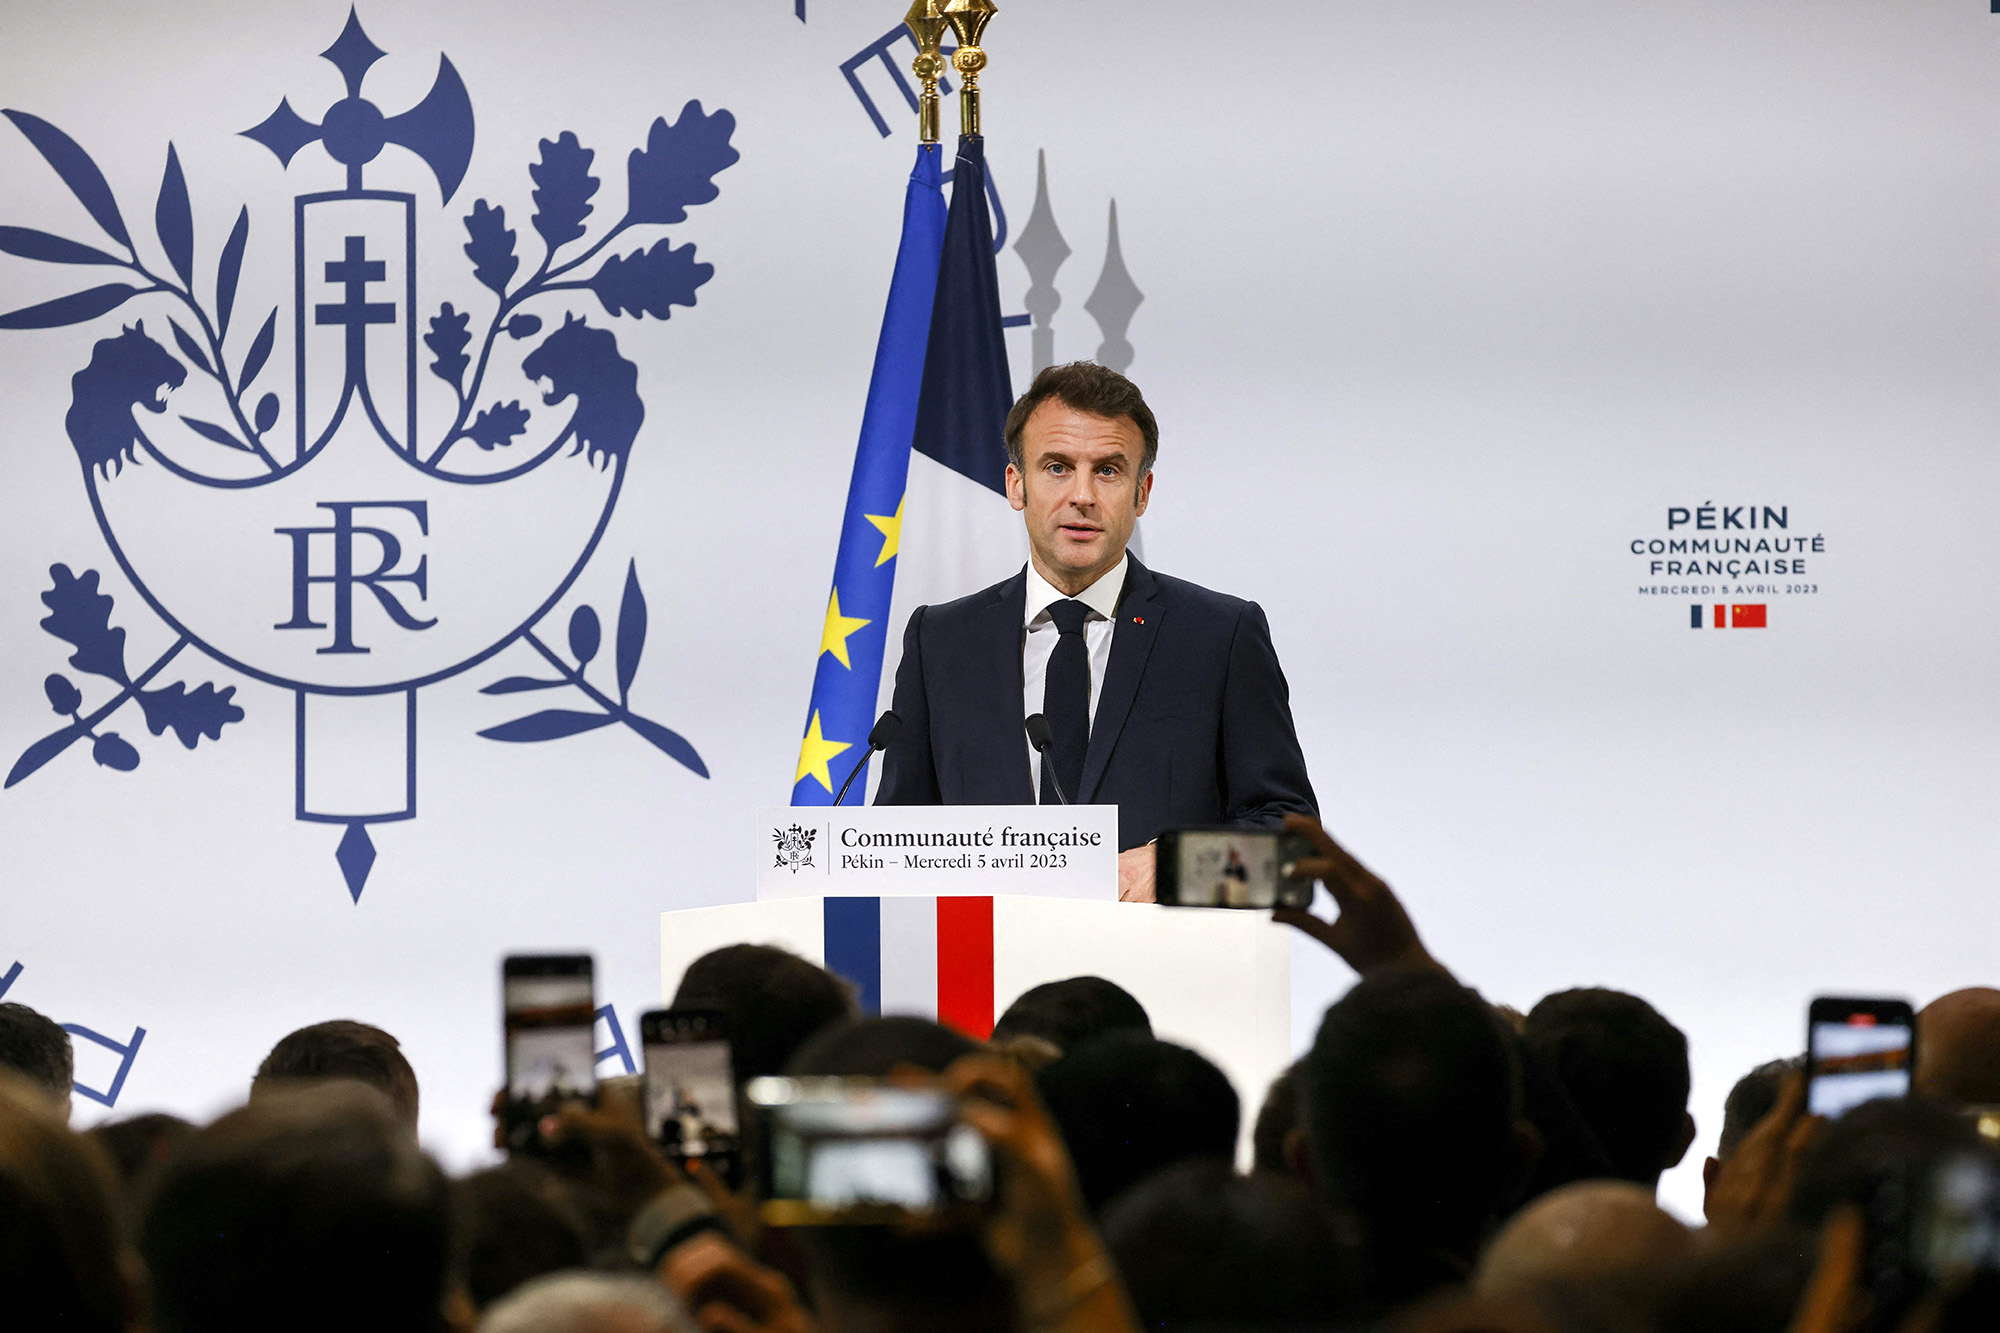 French President Emmanuel Macron speaks during a meeting with China's French community at the residence of France's ambassador in Beijing, China, on April 5.